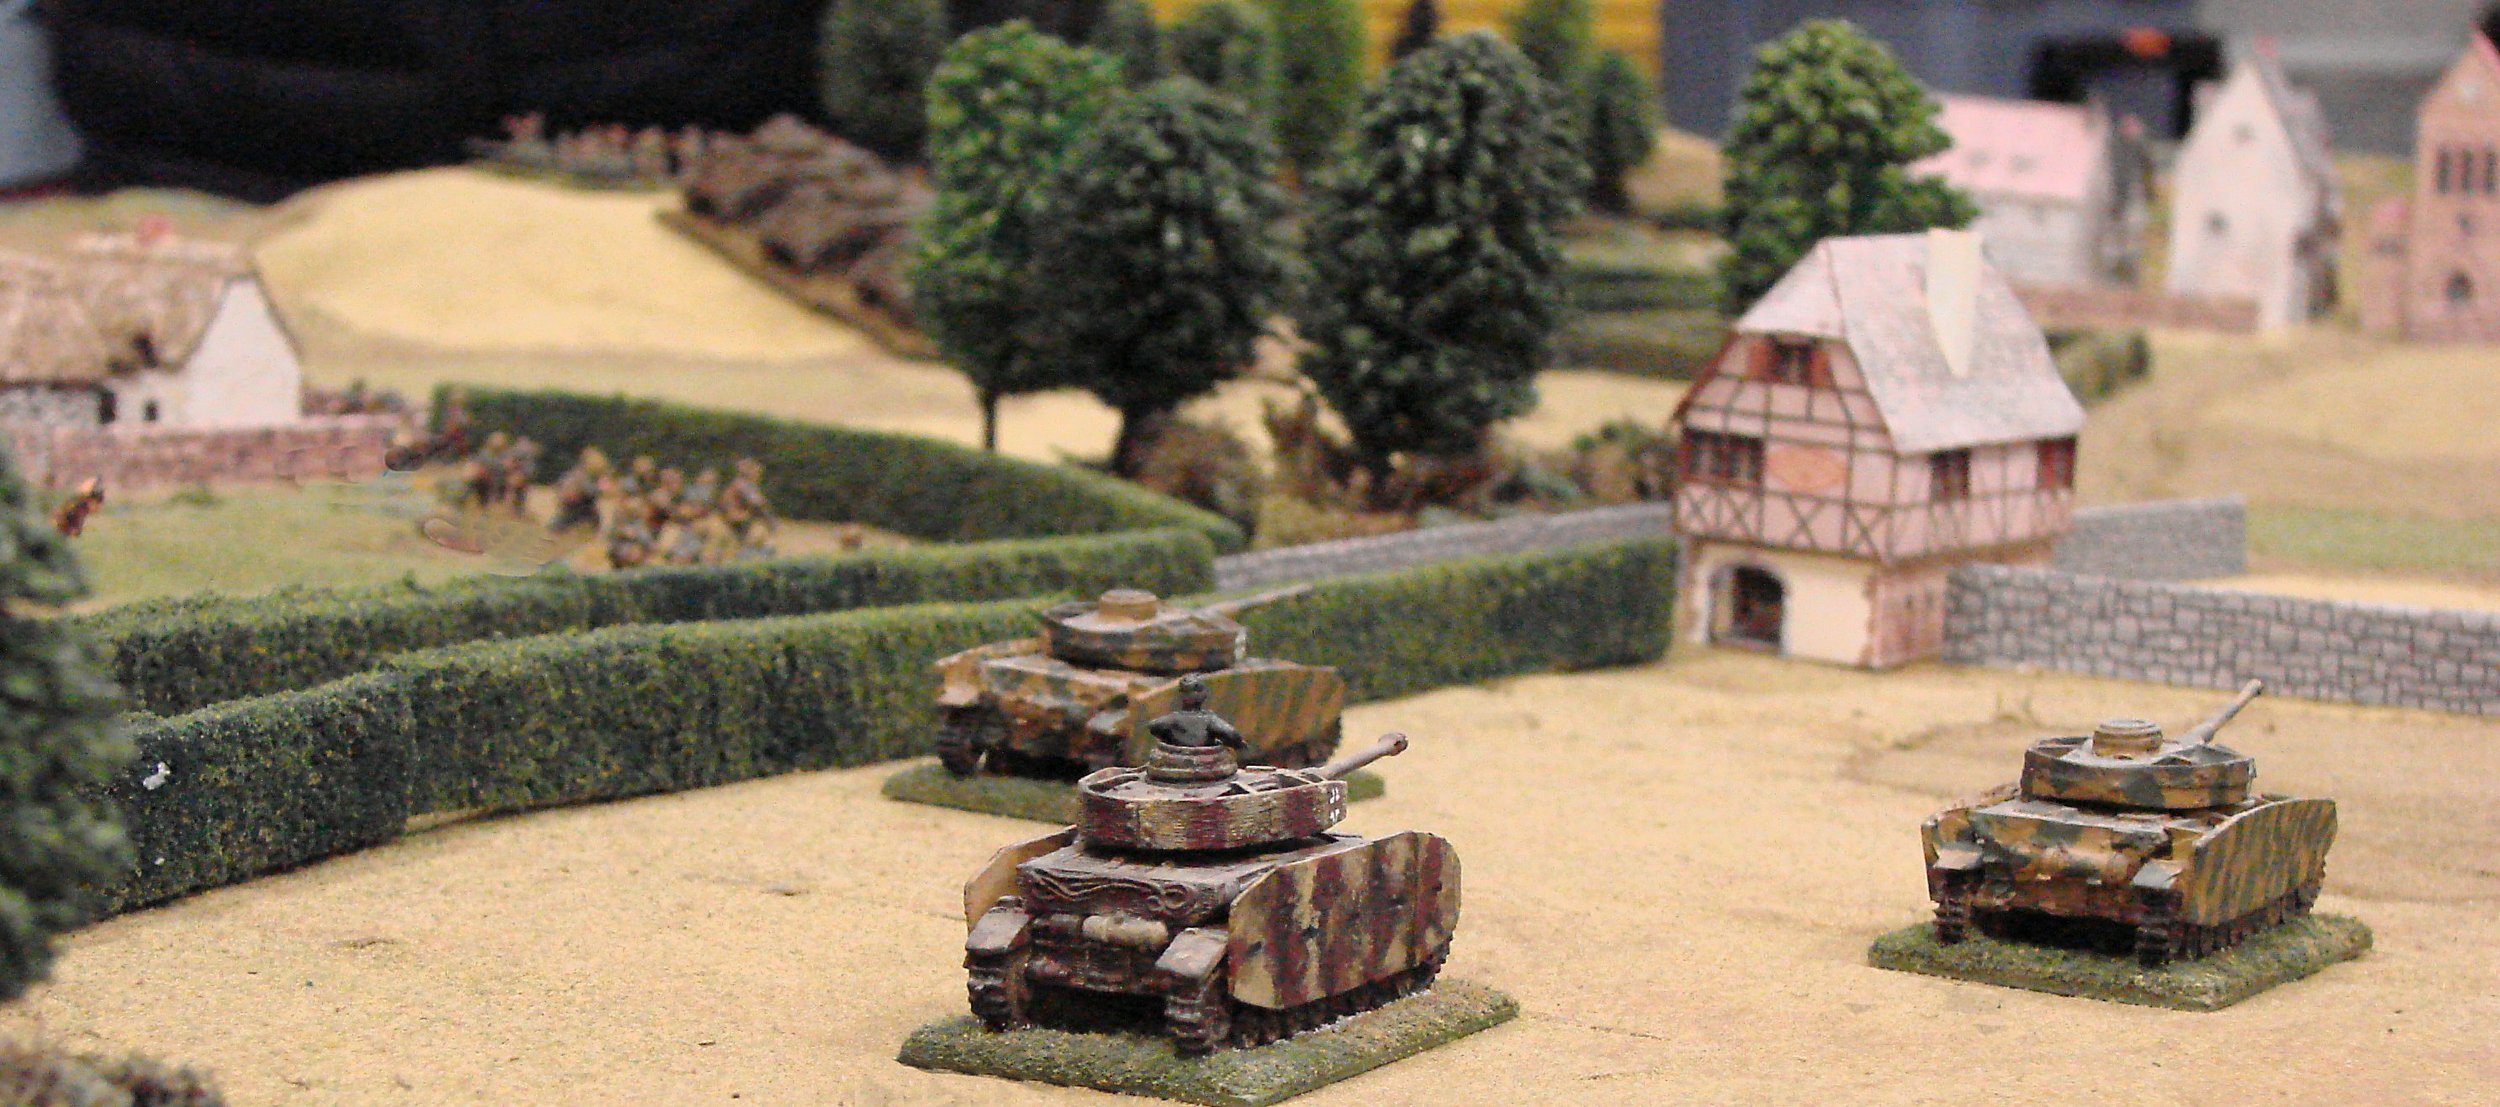 On the right, armor pounds the chateau with high explosives while the infantry drives into the adjacent woods.